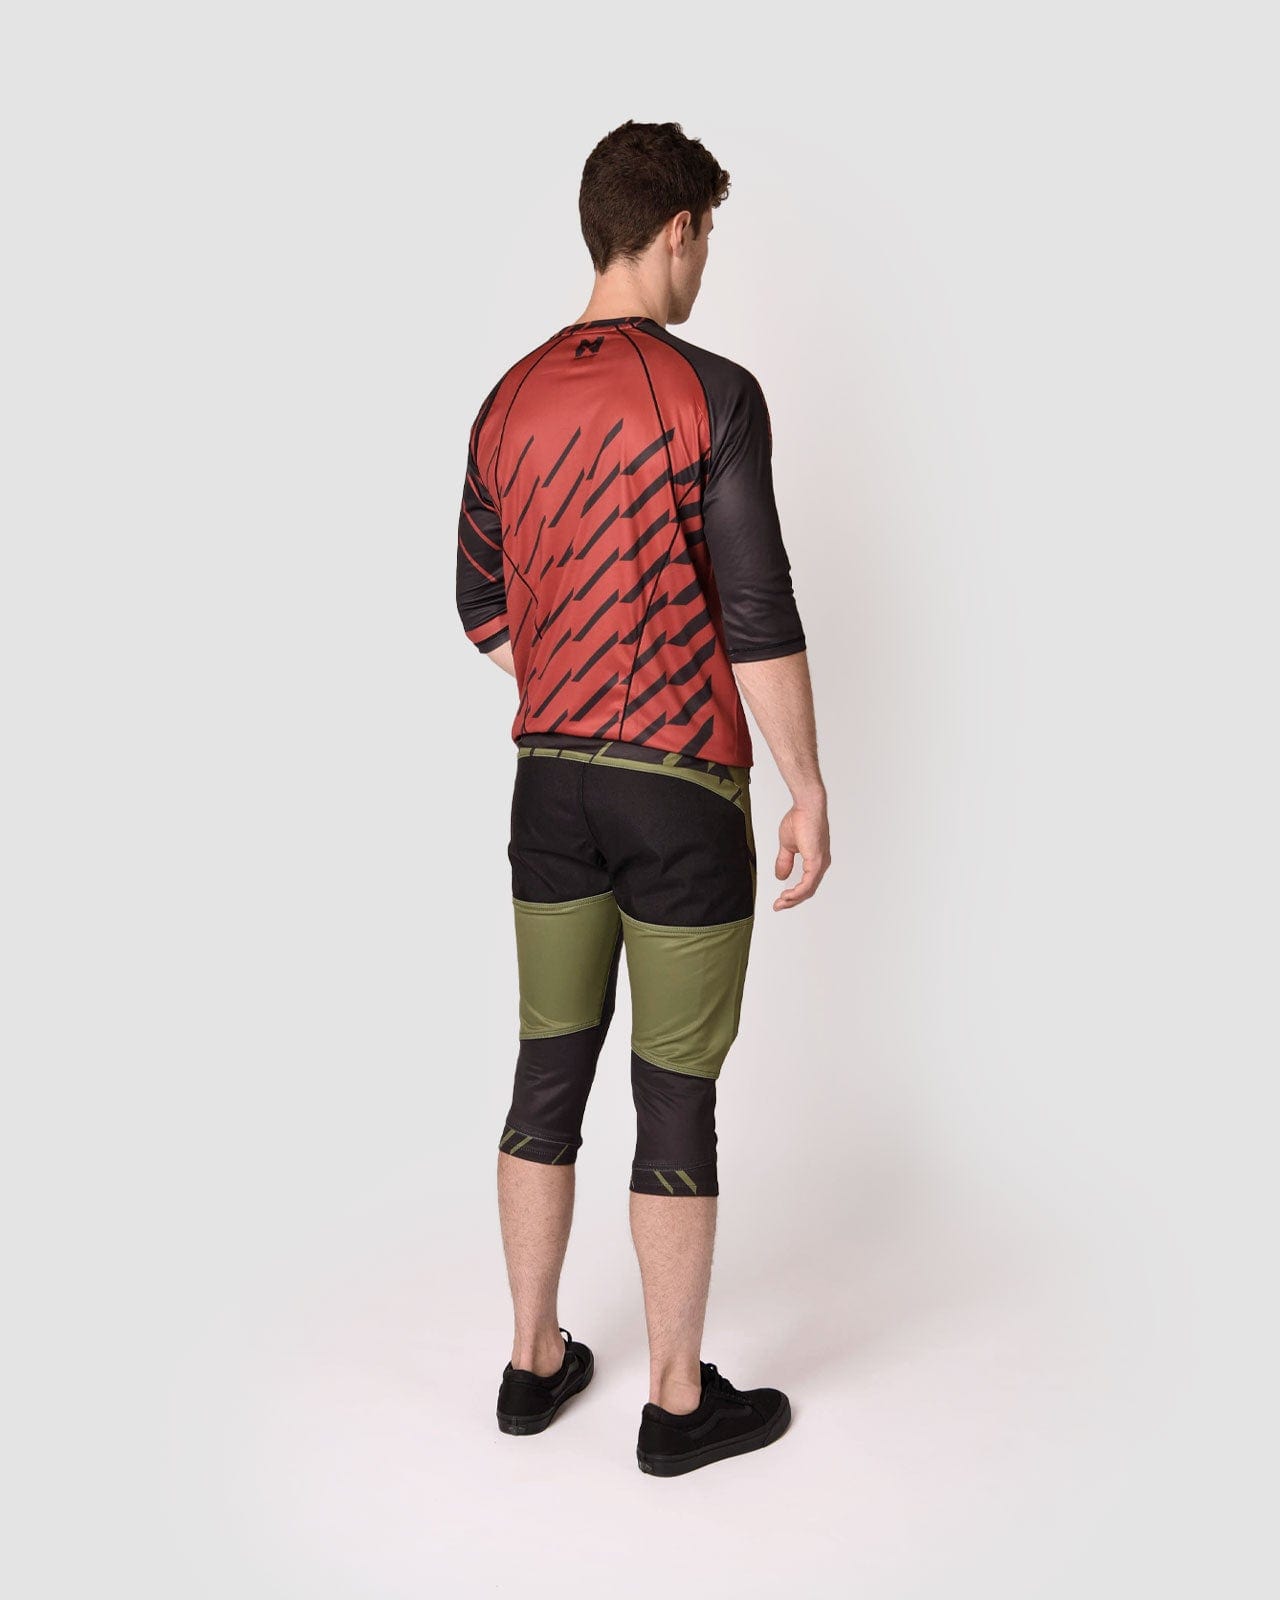 Manufactory Apparel Physical product Electrix Streamline Short